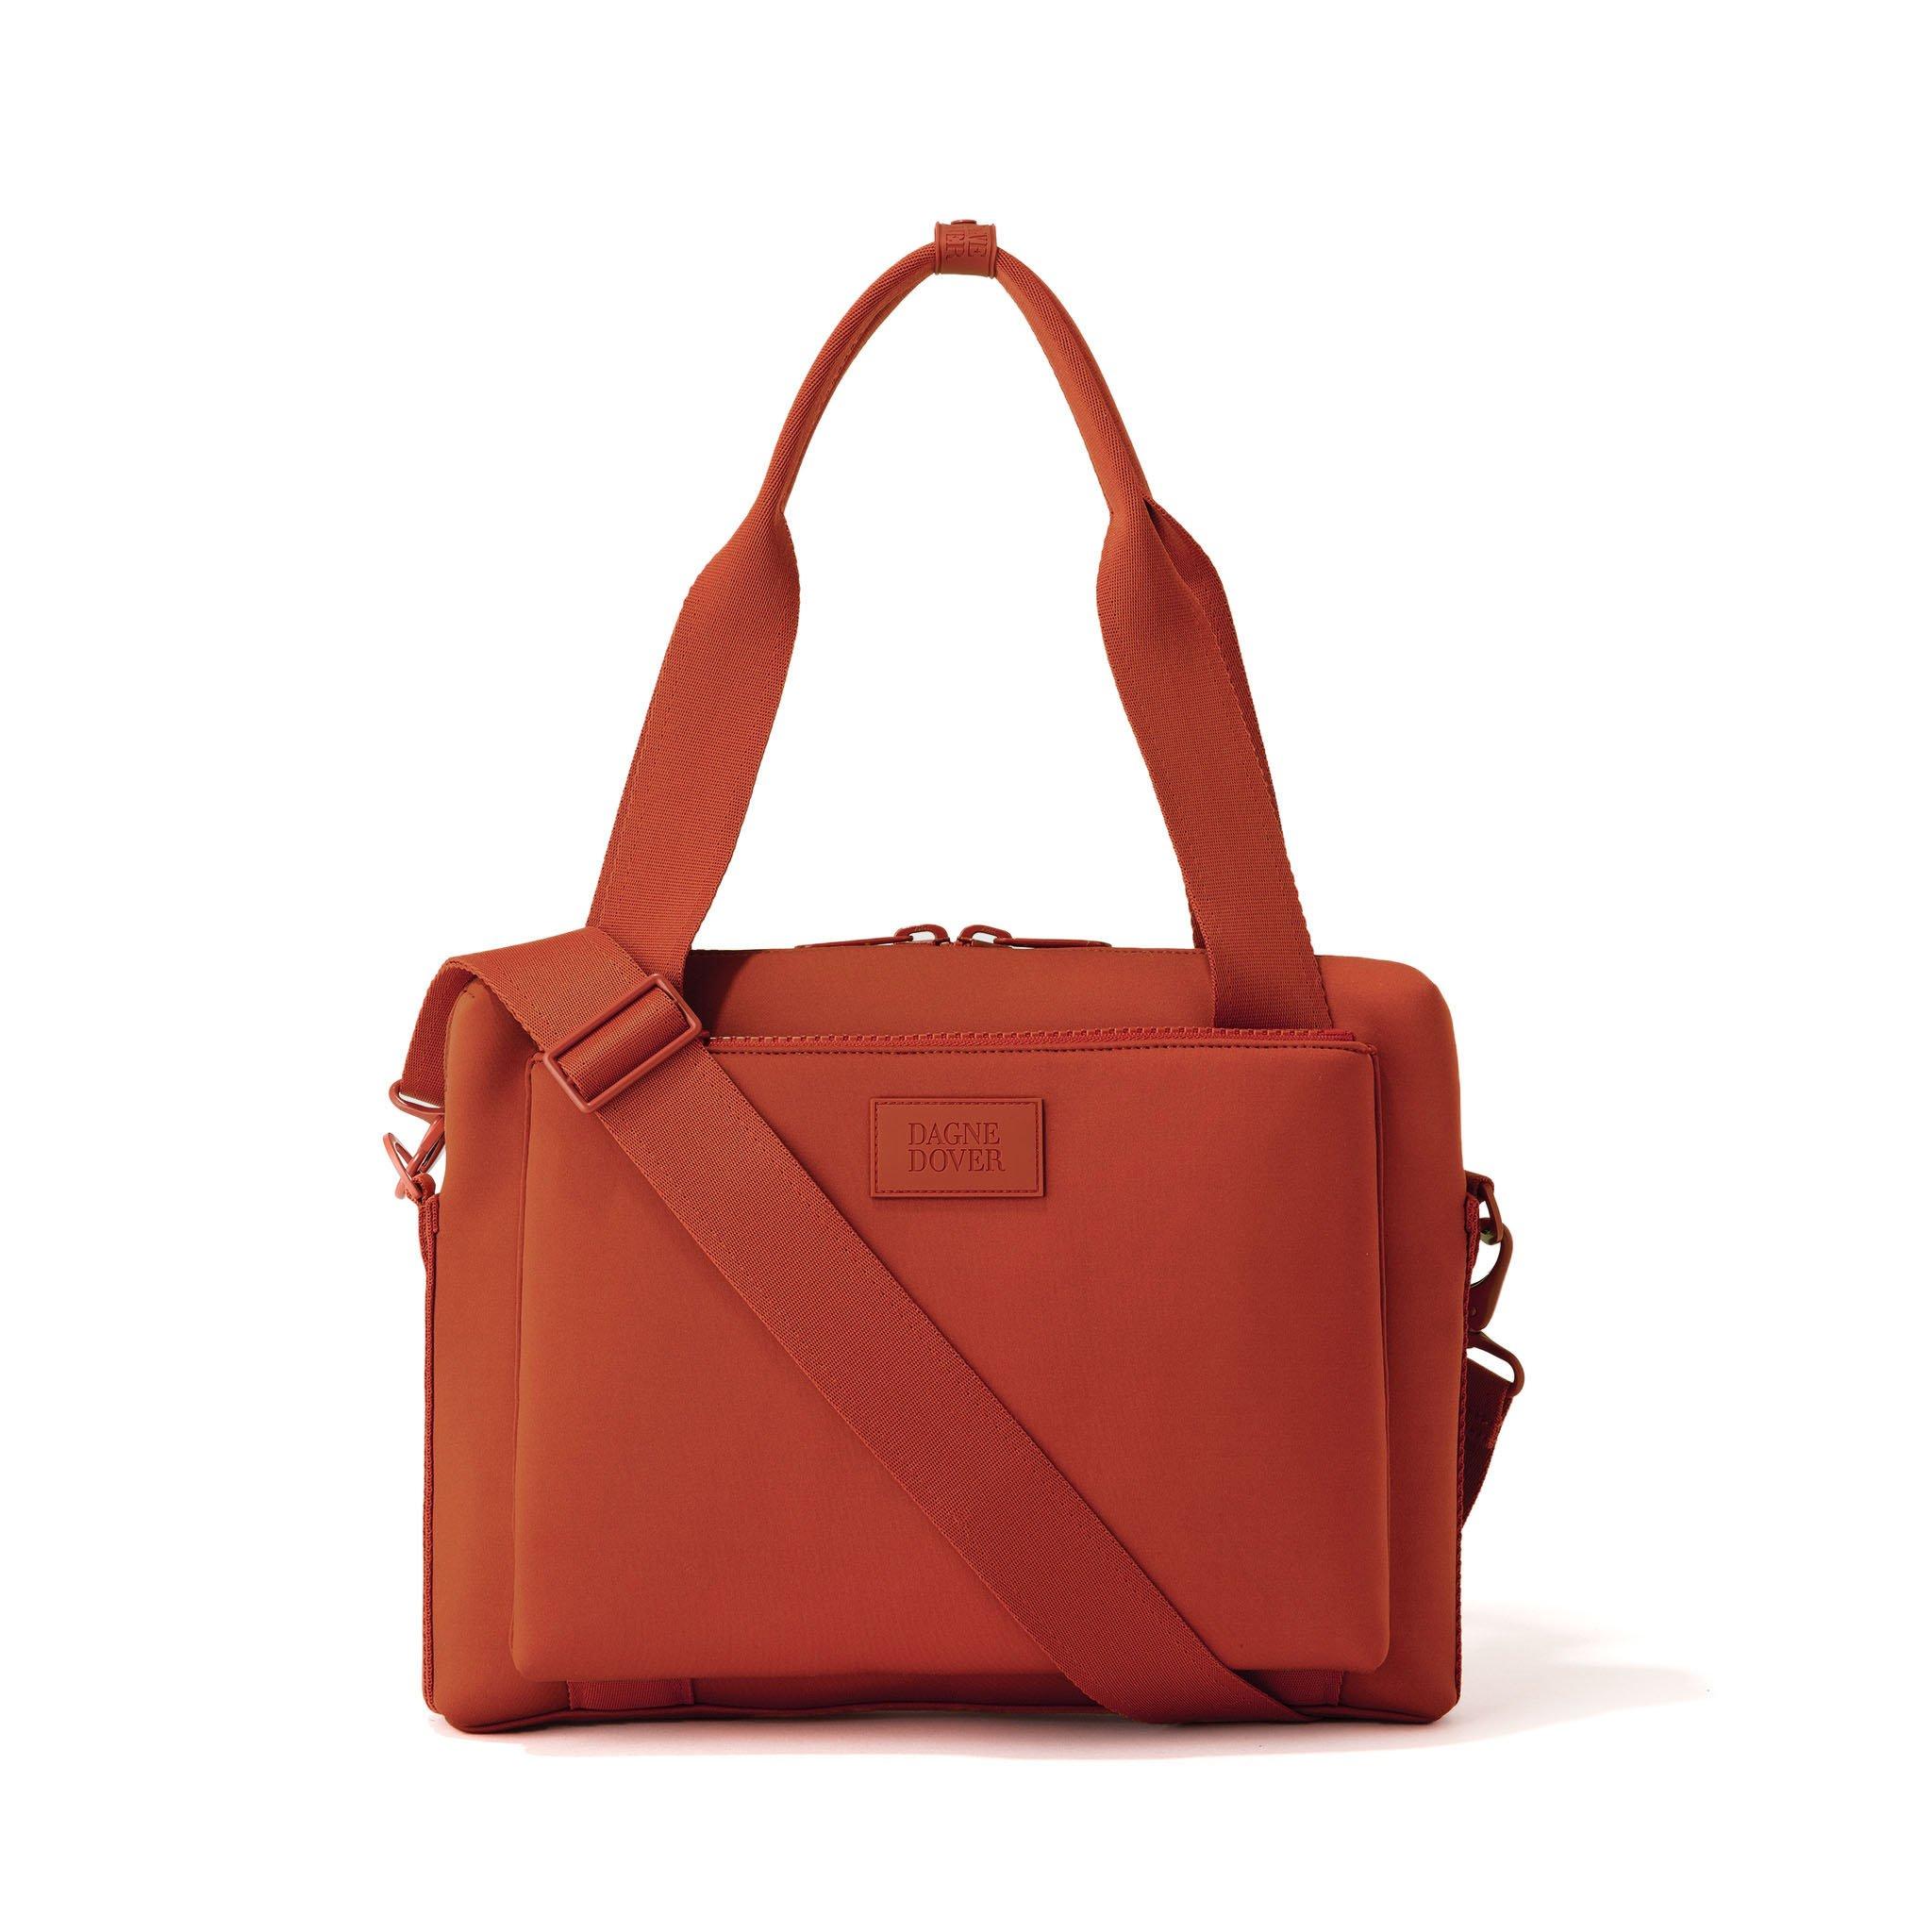 Dagne Dover Ryan Laptop Bag - Clay Red - Medium in Red - Lyst